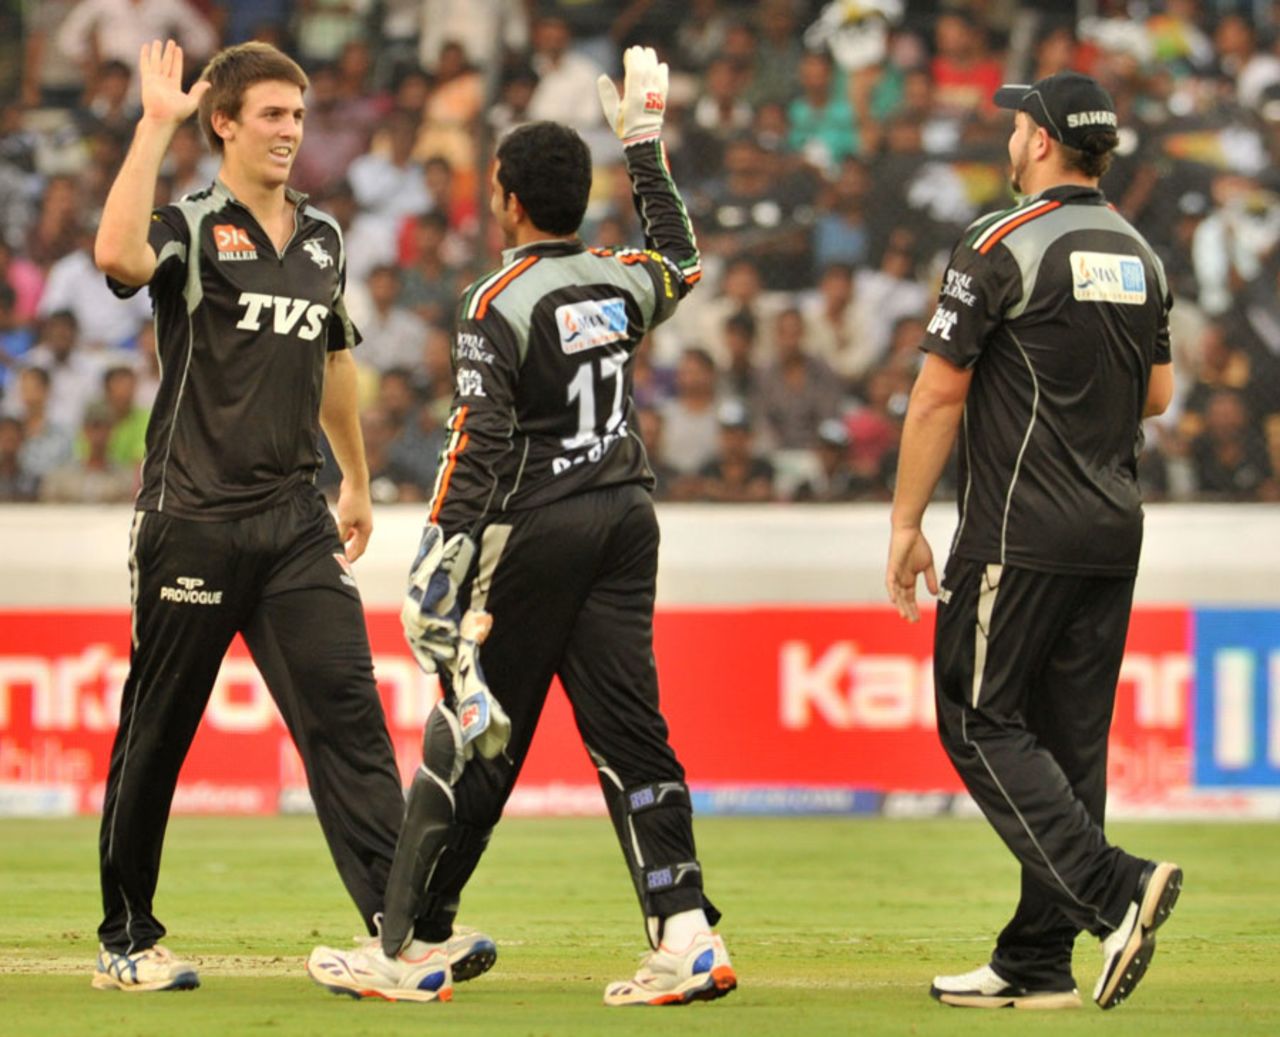 Mitchell Marsh's four wickets stalled Deccan Chargers' progress, Deccan Chargers v Pune Warriors, IPL 2011, Hyderabad, April 10, 2011